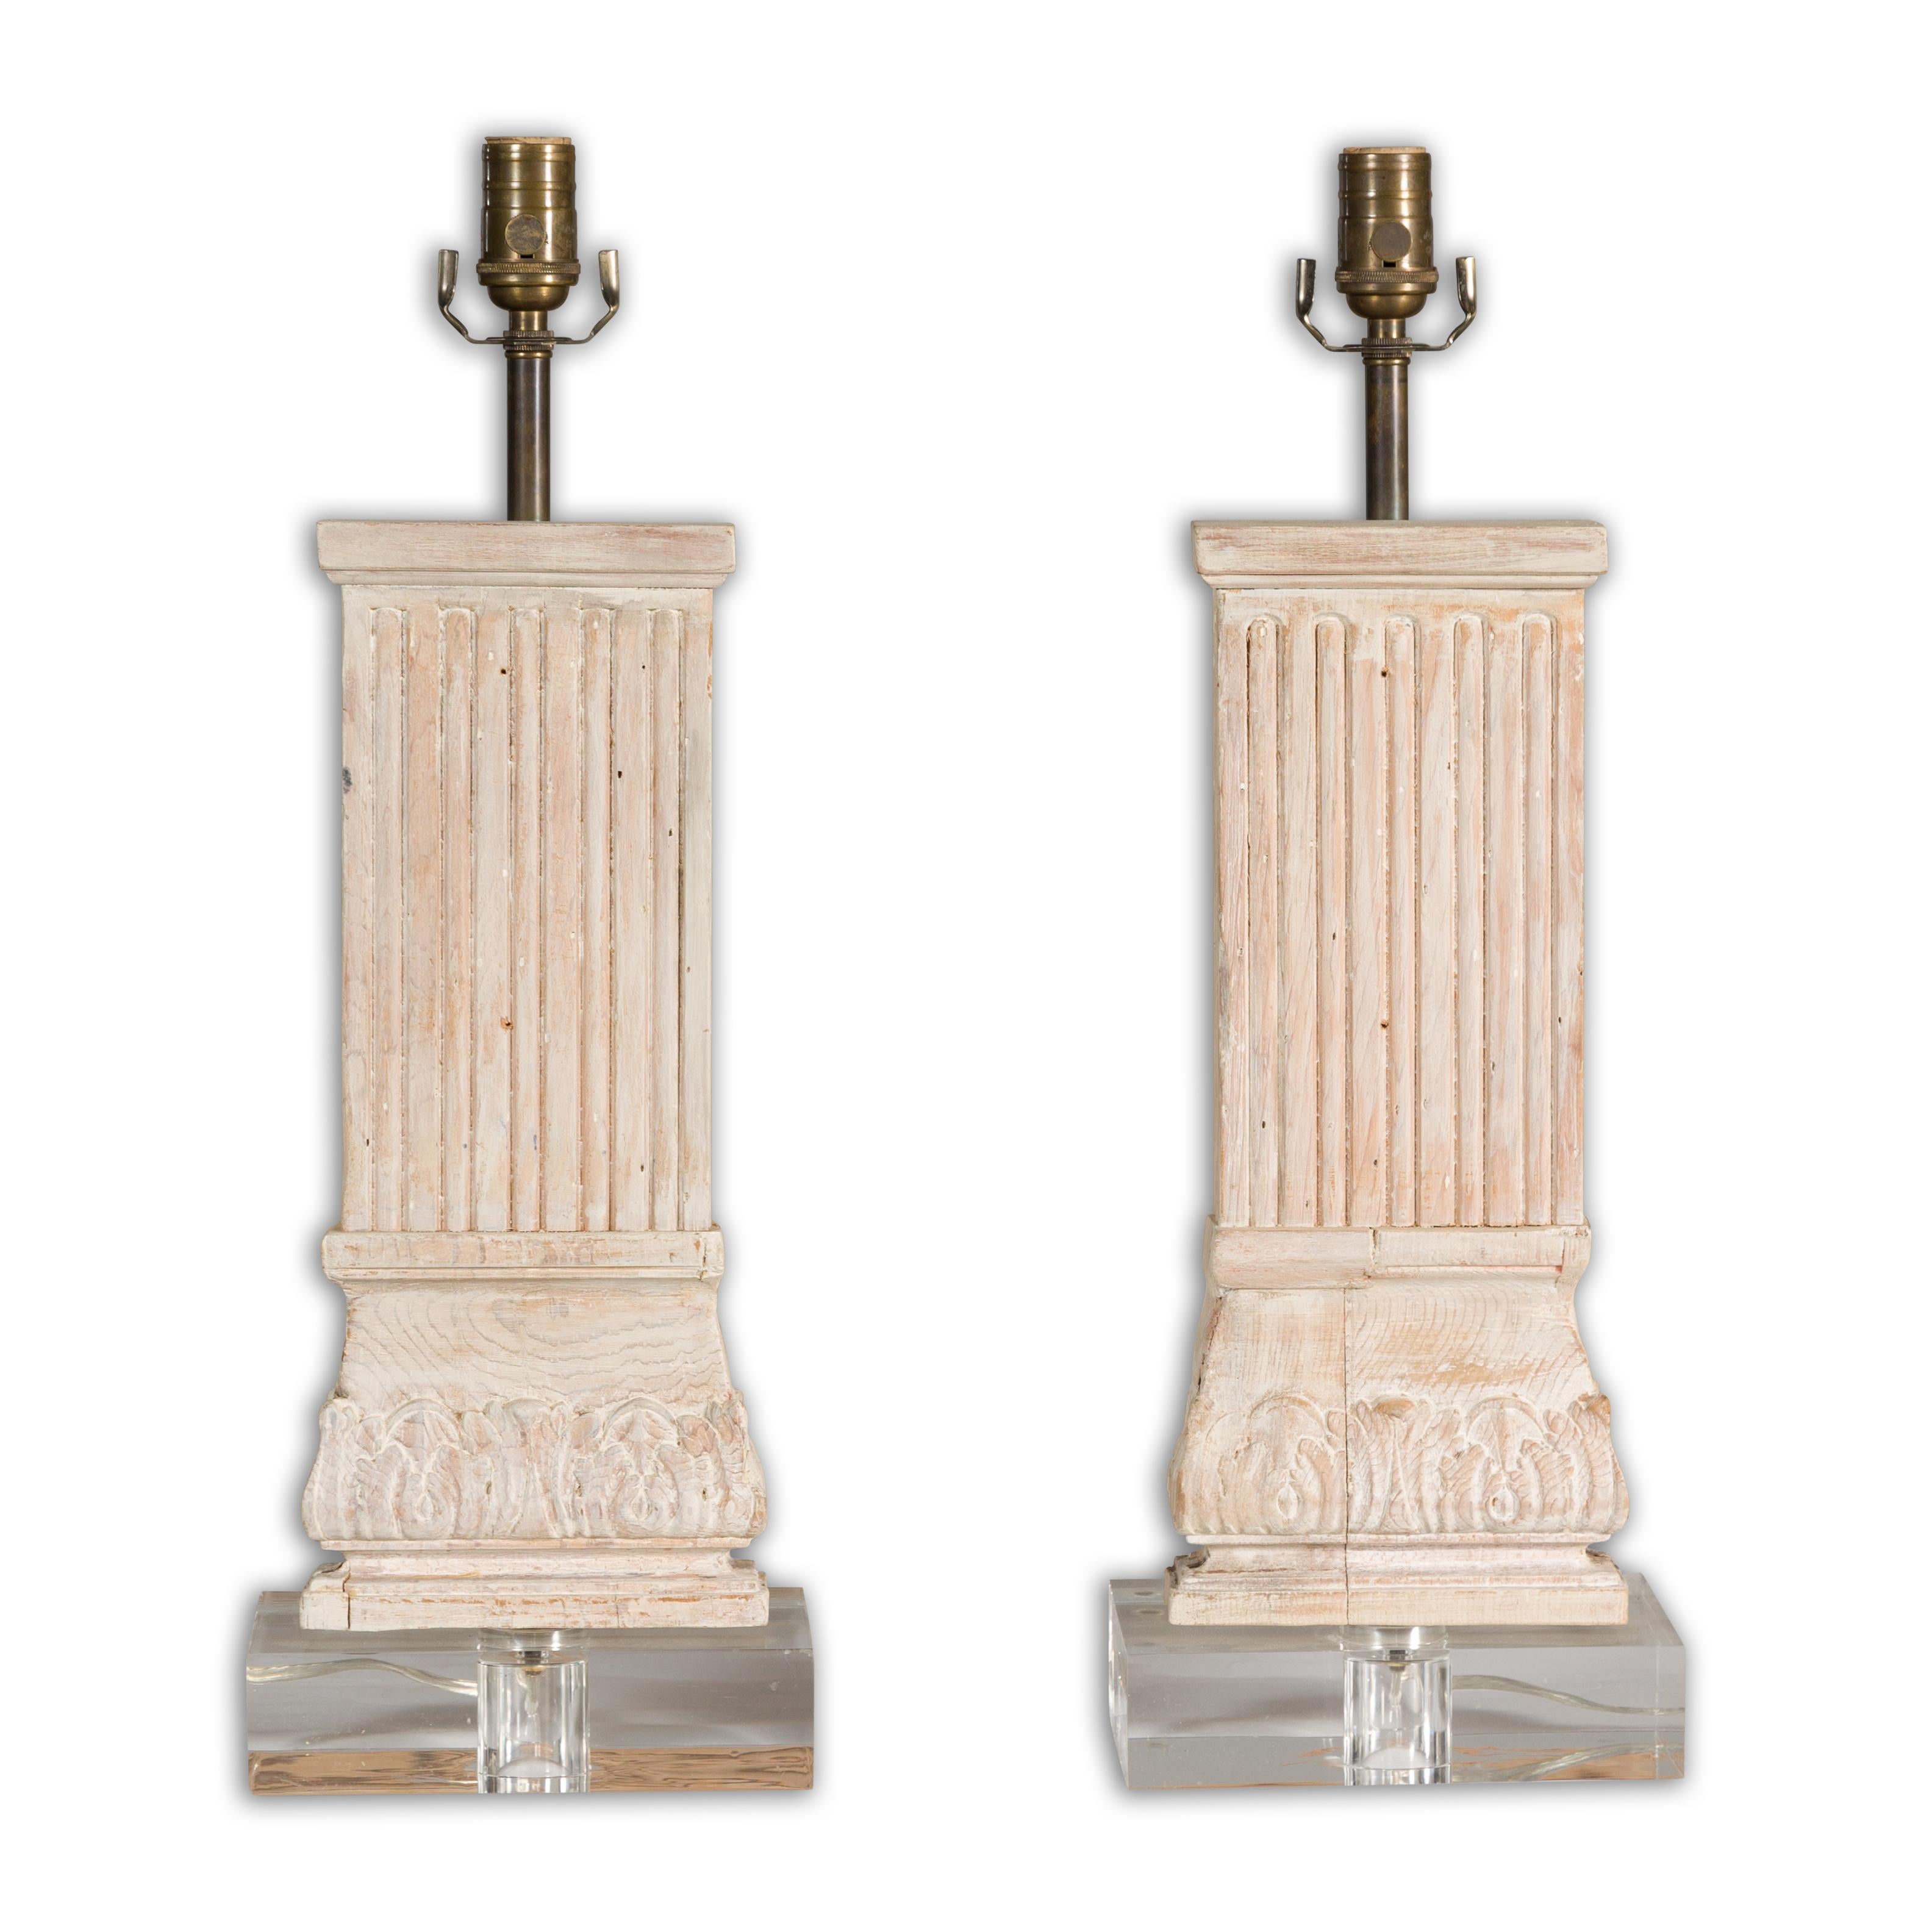 A pair of Italian Midcentury carved pine pilaster table lamps on lucite bases, US wired. Introducing a striking pair of Italian Midcentury carved pine pilaster table lamps, bringing the architectural grandeur to your living space. Crafted in the